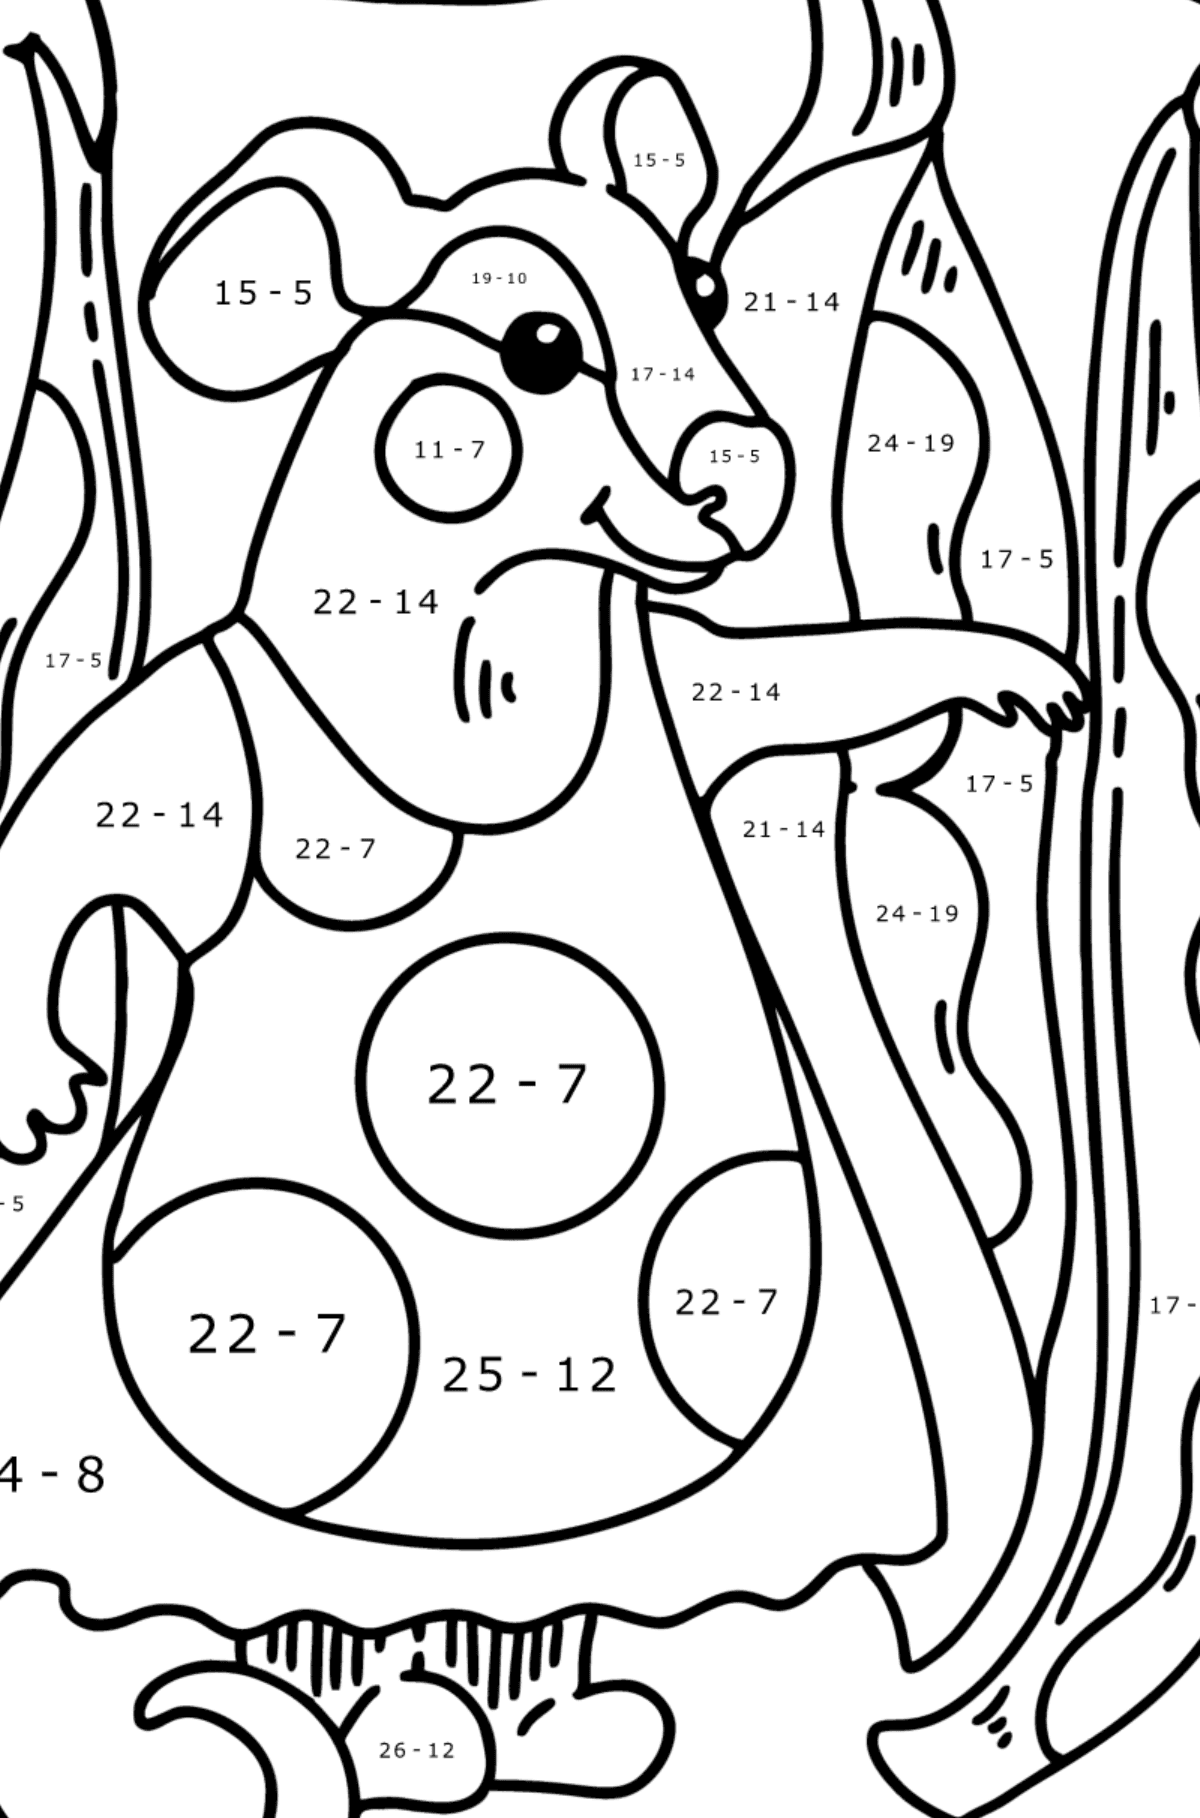 Coloring page - Cute Mouse - Math Coloring - Subtraction for Kids